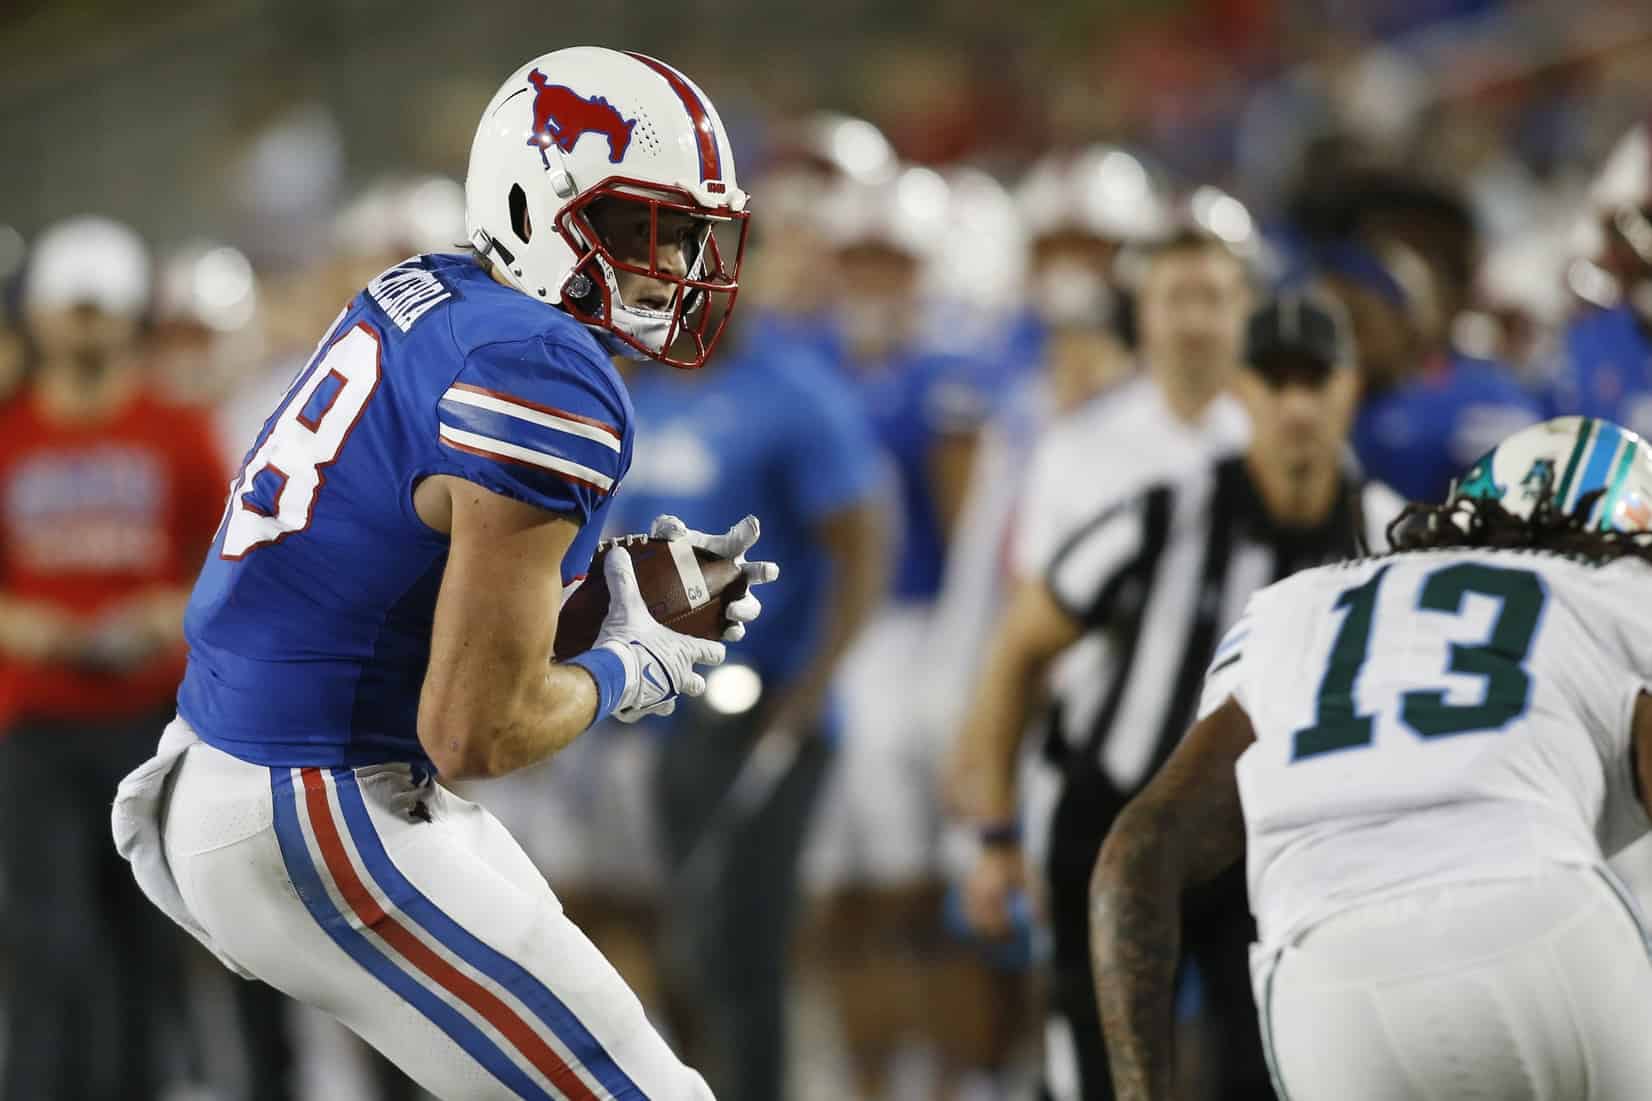 SMU 2022 NFL Draft Scouting Reports include Grant Calcaterra and Danny Gray